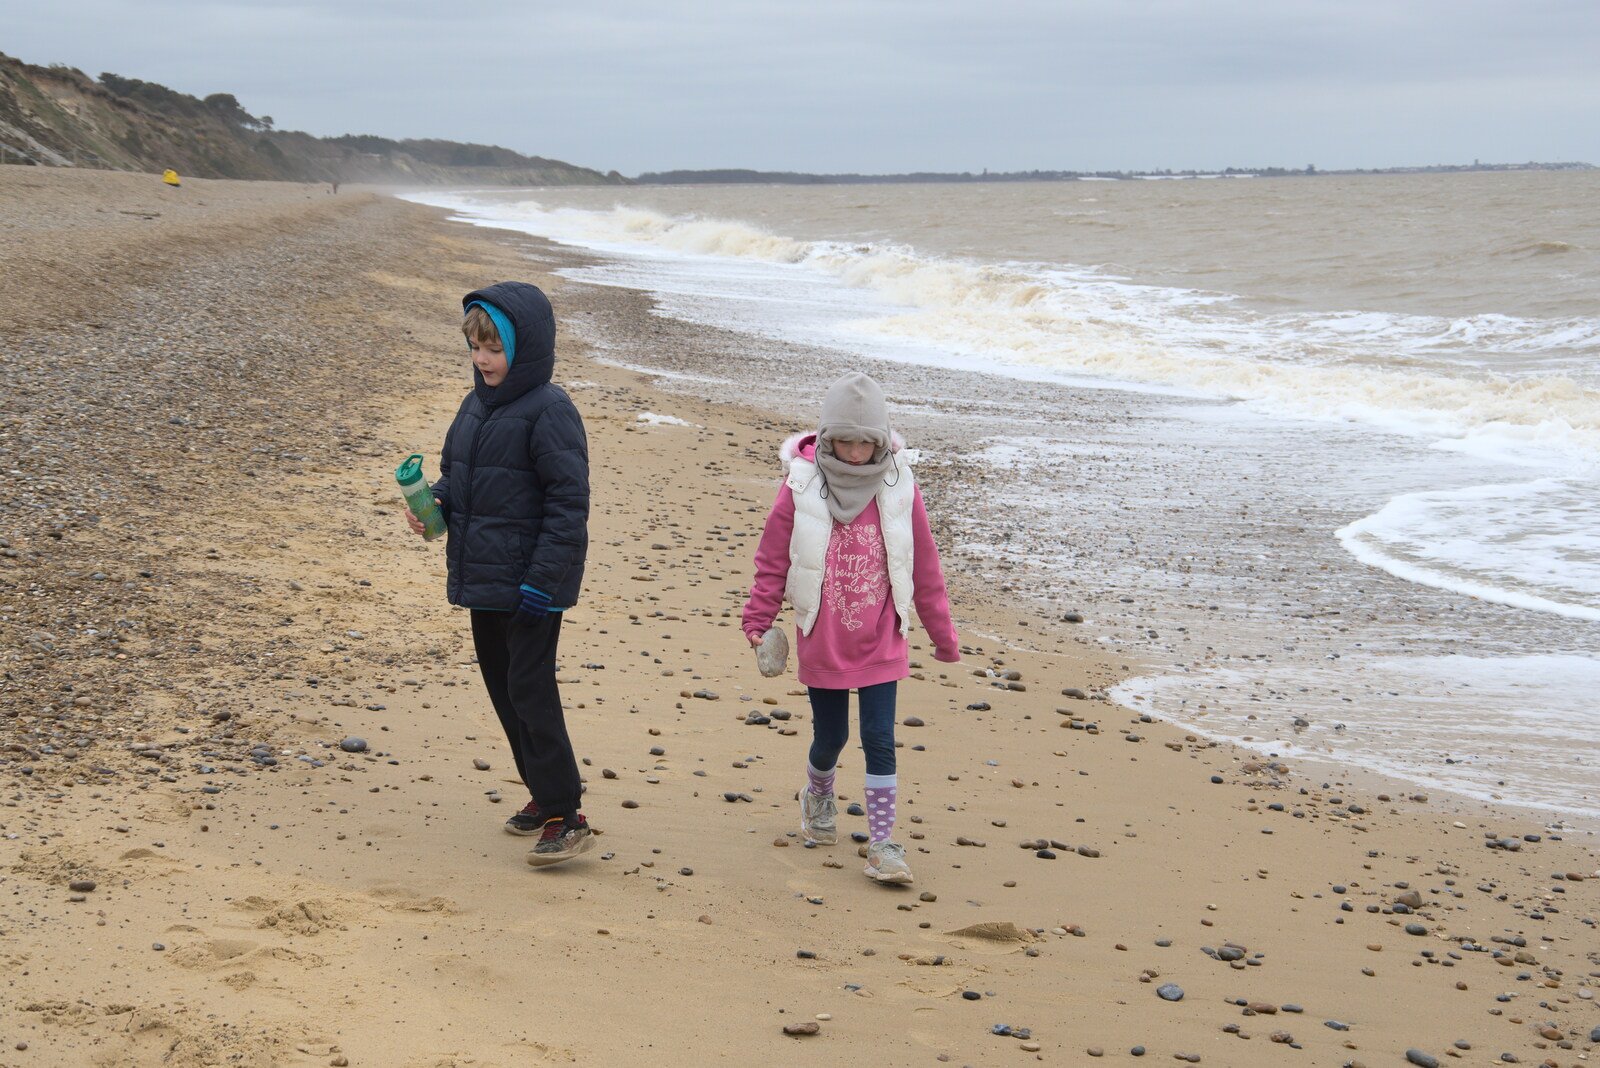 Harry and Megan on the beach from A Trip to Dunwich Beach, Dunwich, Suffolk - 2nd April 2021